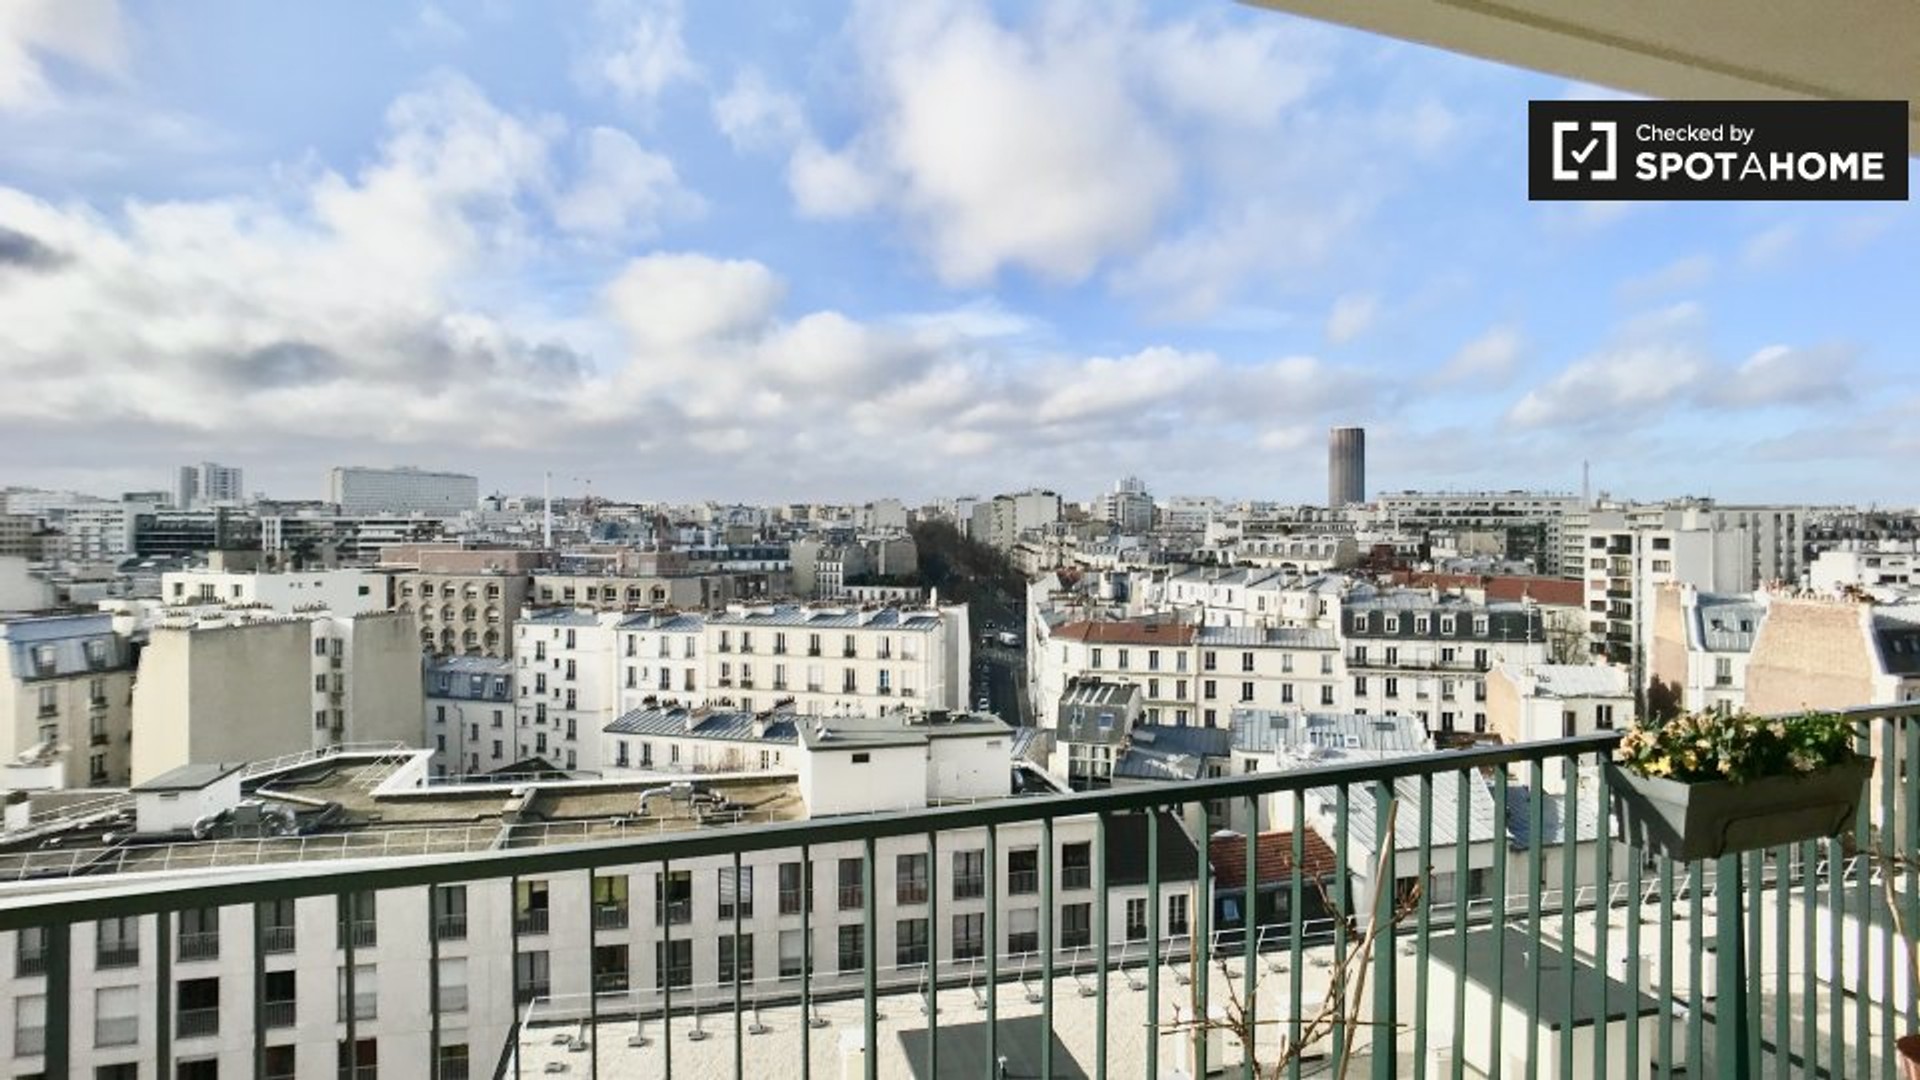 Entire fully furnished flat in Paris